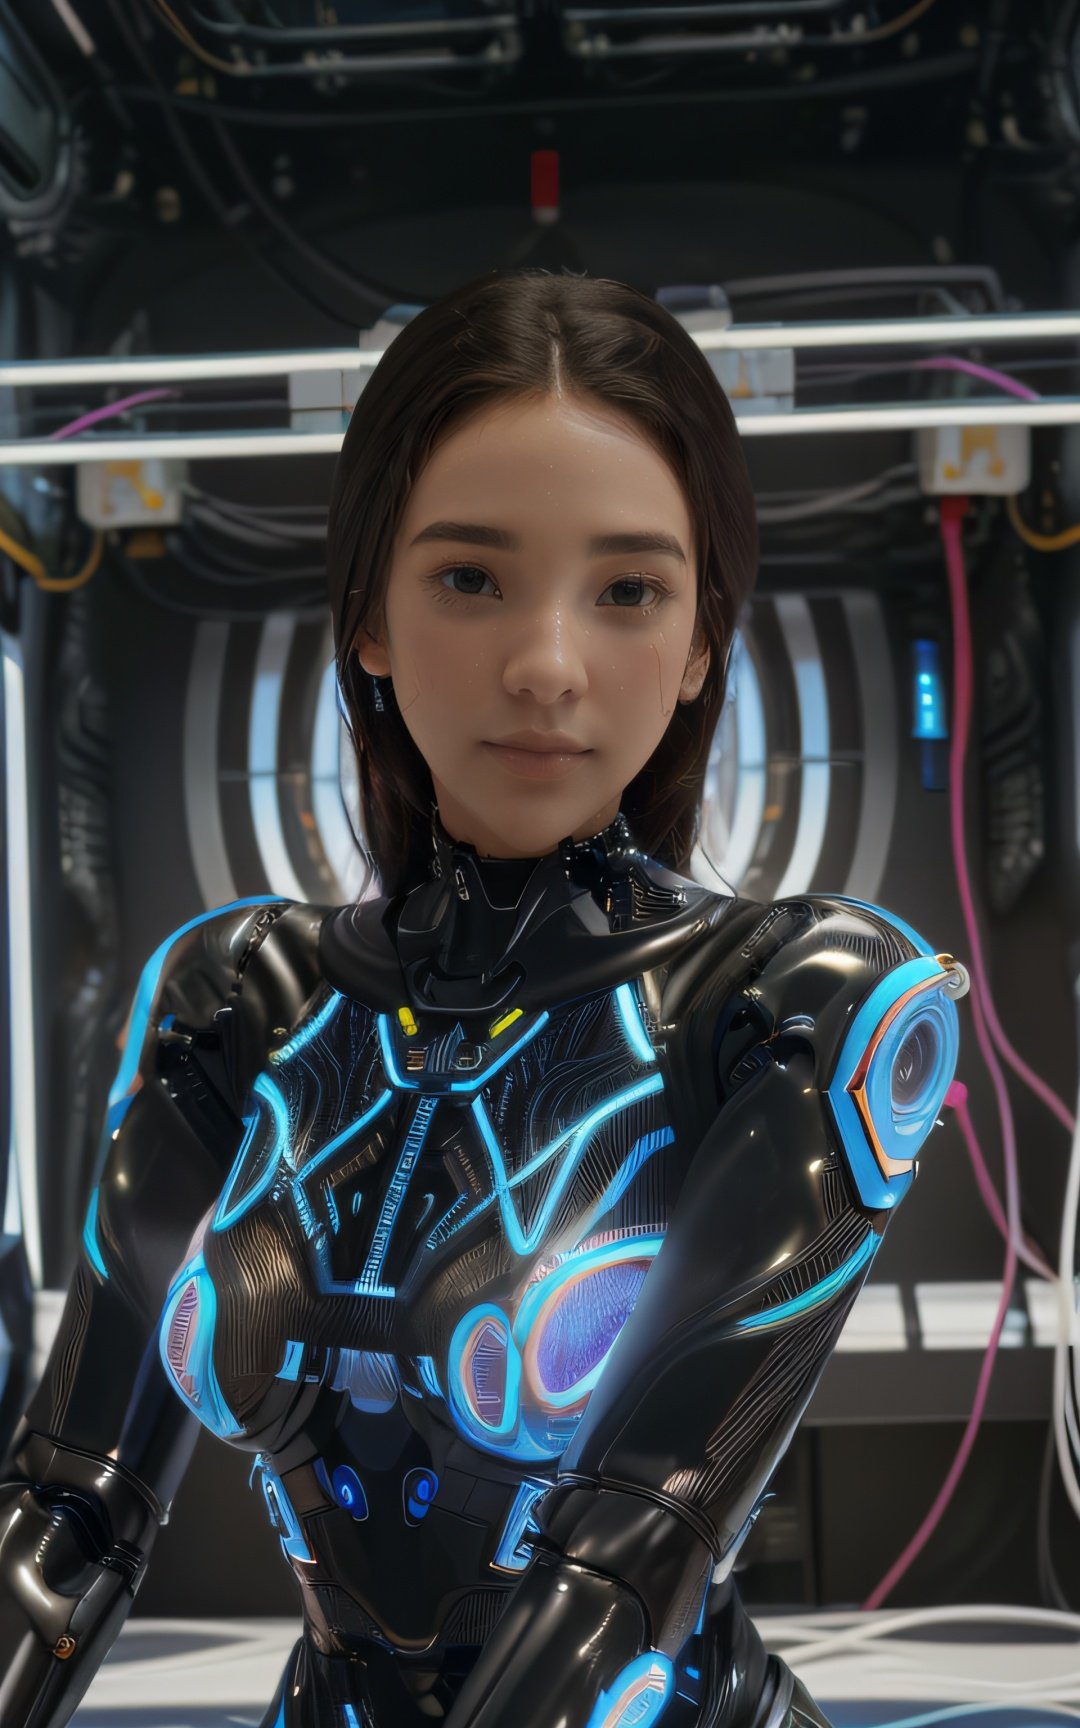 (official art, beautiful and aesthetic:1. 2), (single girl:1. 3), complex 3d render ultra detailed of a beautiful porcelain profile woman robot, (white and black cybernetic implants), (fractal art:1. 1), (colored electronic cables and chips:1. 3), highest detailed, (zentangle:1. 2), (abstract background:1. 3), (shiny skin), (many colors:1. 4), (several mechanical robot arms fixing her electronic parts), (full of finger-thick electronic cables wired to body parts:1. 5), (mechanical android body suit), (tired and sleepy face:1. 2), (expressionless), cowboy shot, ultra realistic:1. 4, (pureerosface_v1:0. 6) ,, <lora:4nya_V2-000002:0.8>